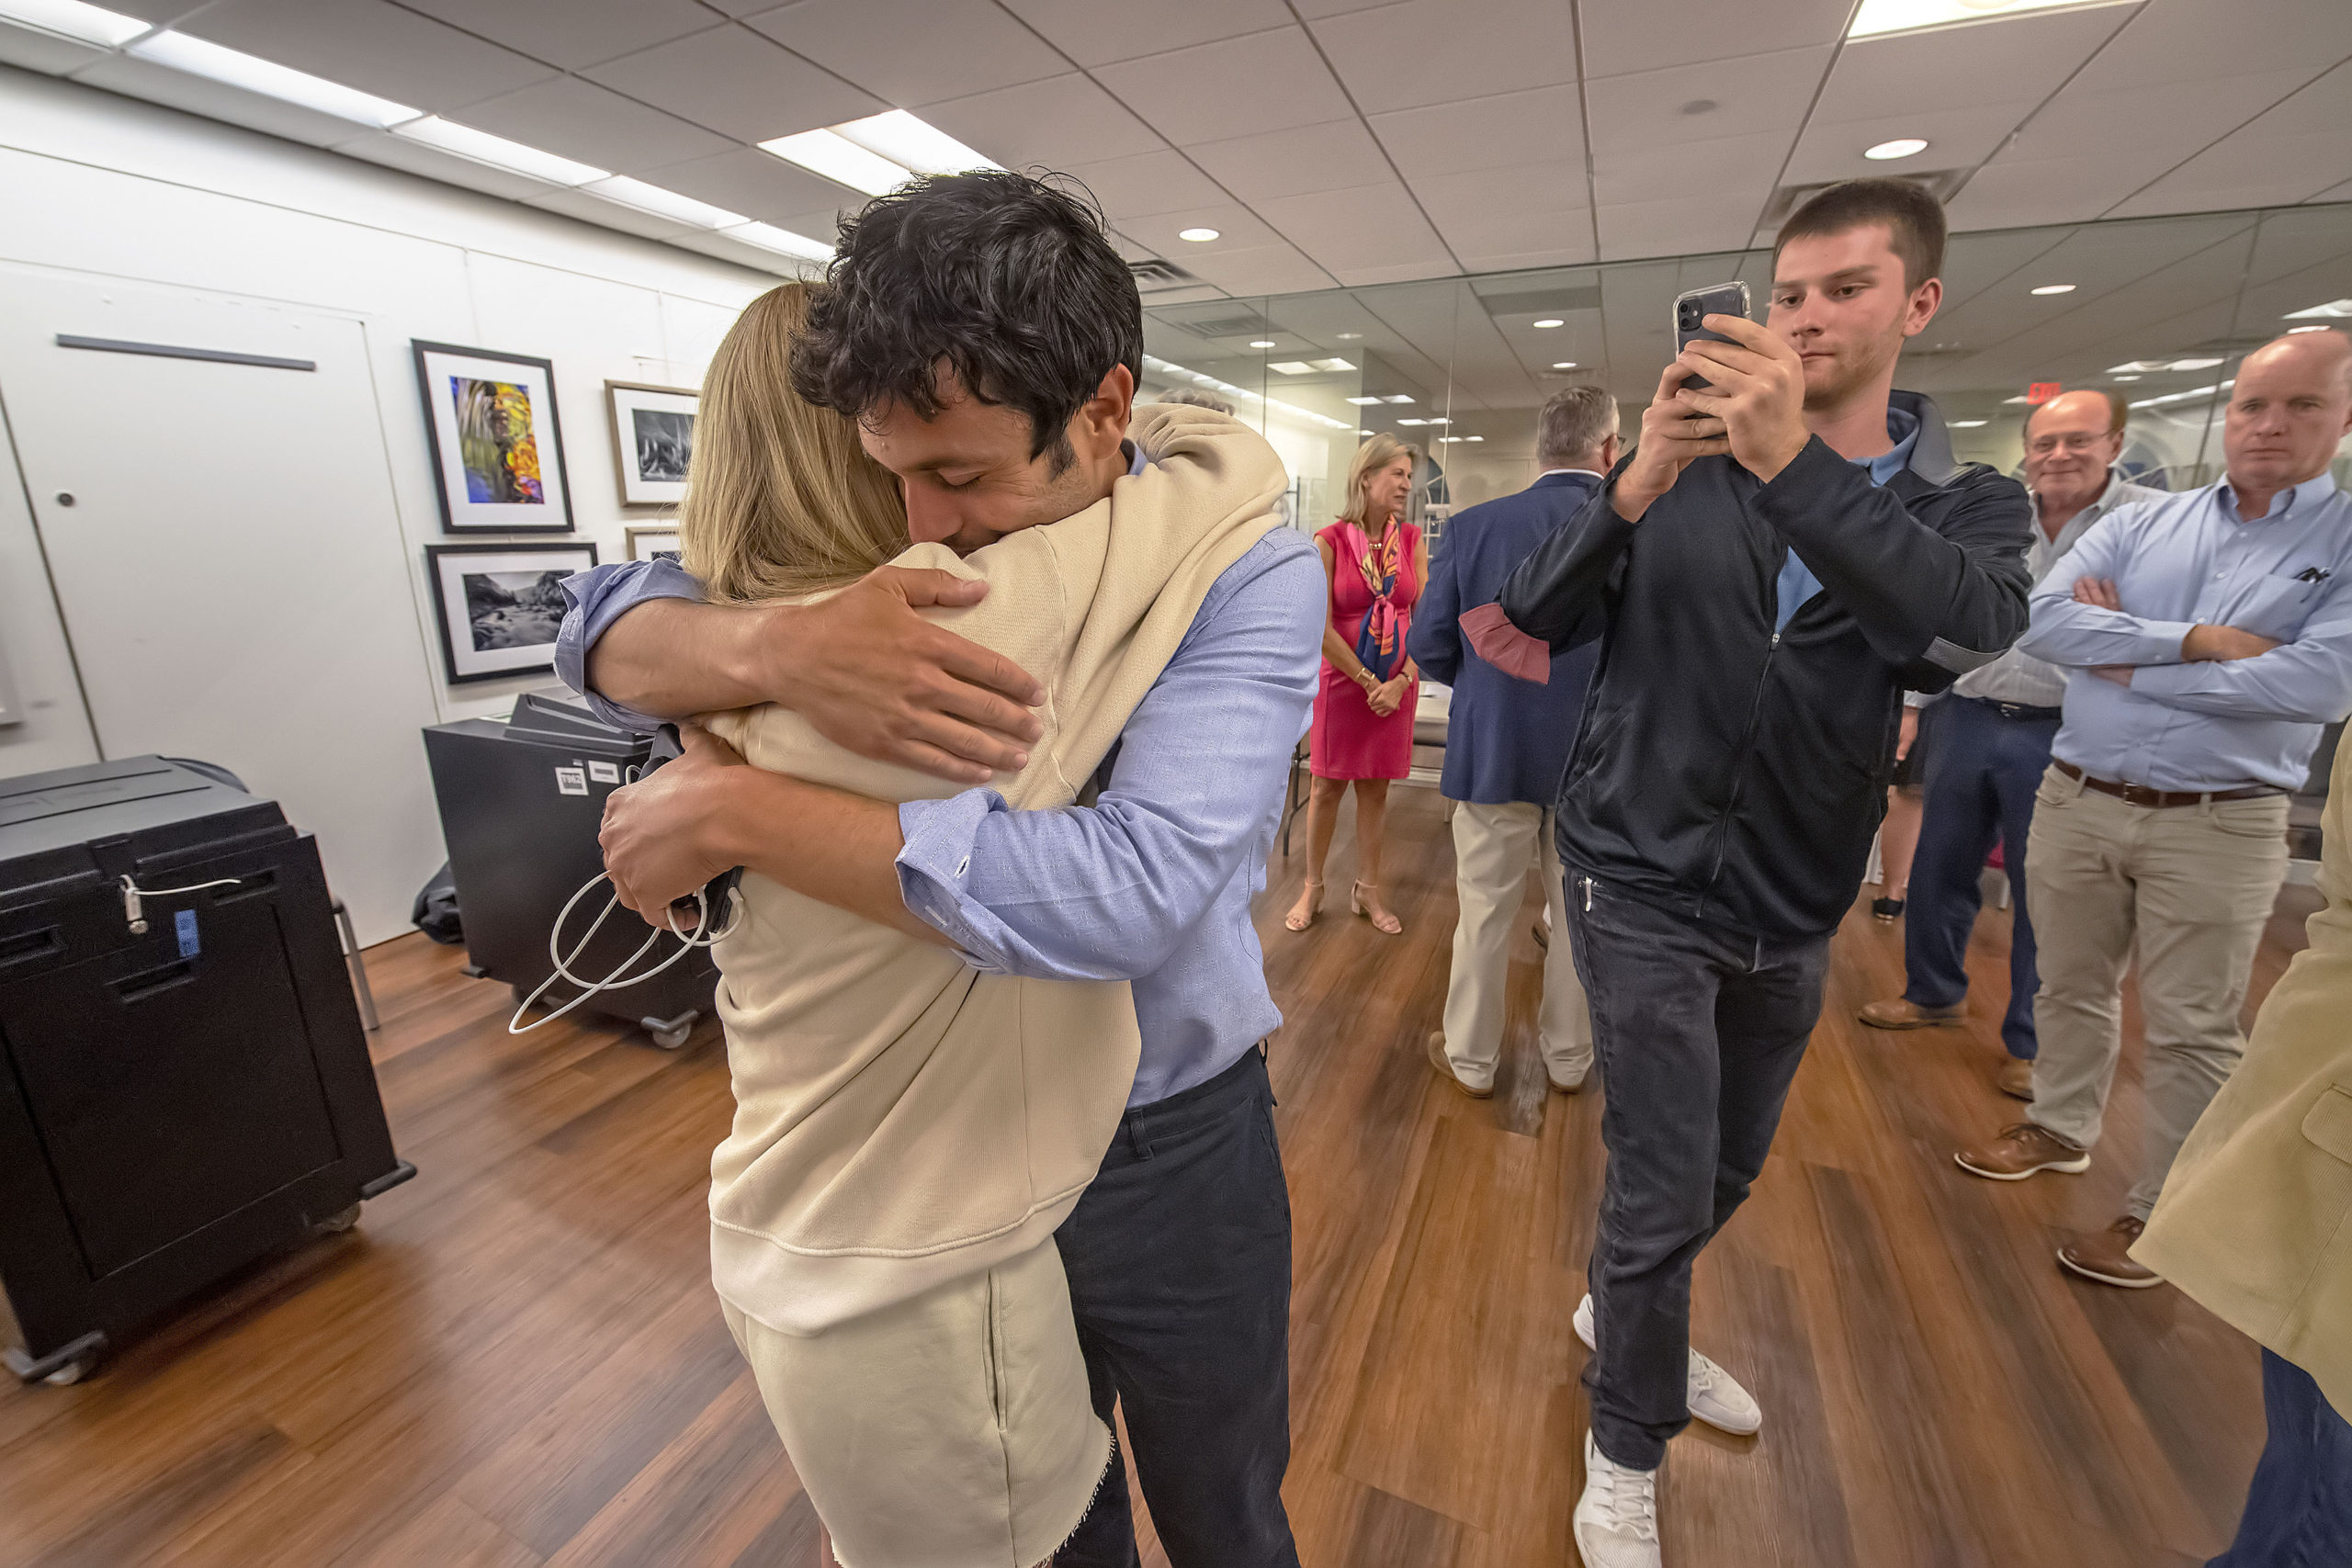 As his communications director takes some video, newly-re-elected Southampton Village Mayor Jesse Warren gets a long hug from his girlfriend Martyna Sokol following the 2021 Southampton Village Mayoral election at the Southampton Cultural Center on Friday night. MICHAEL HELLER